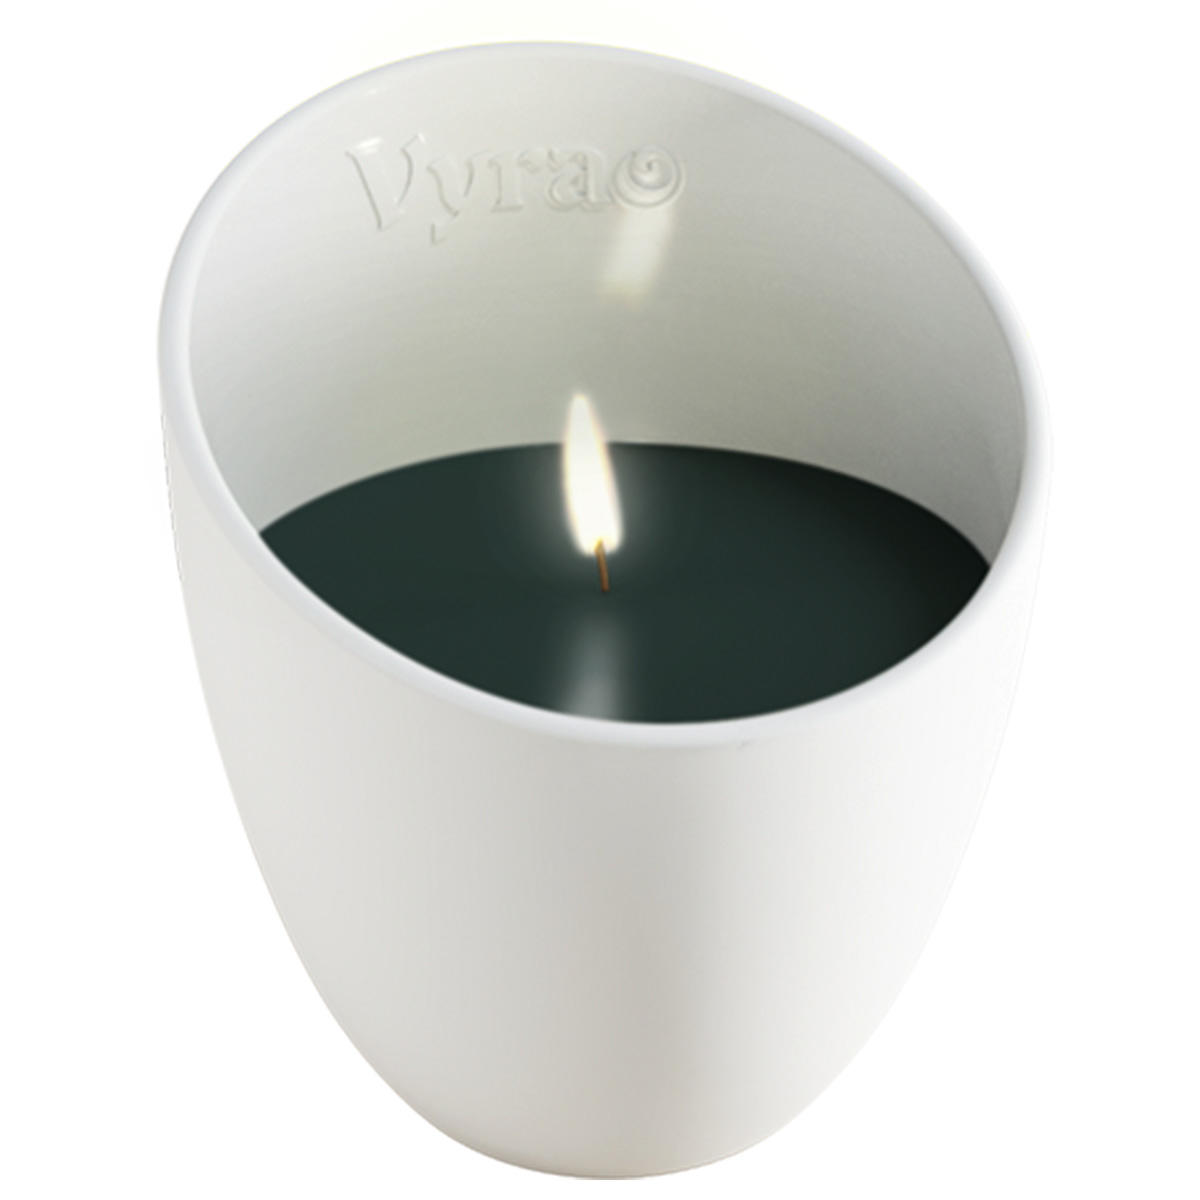 Vyrao EMBER CANDLE 170 g